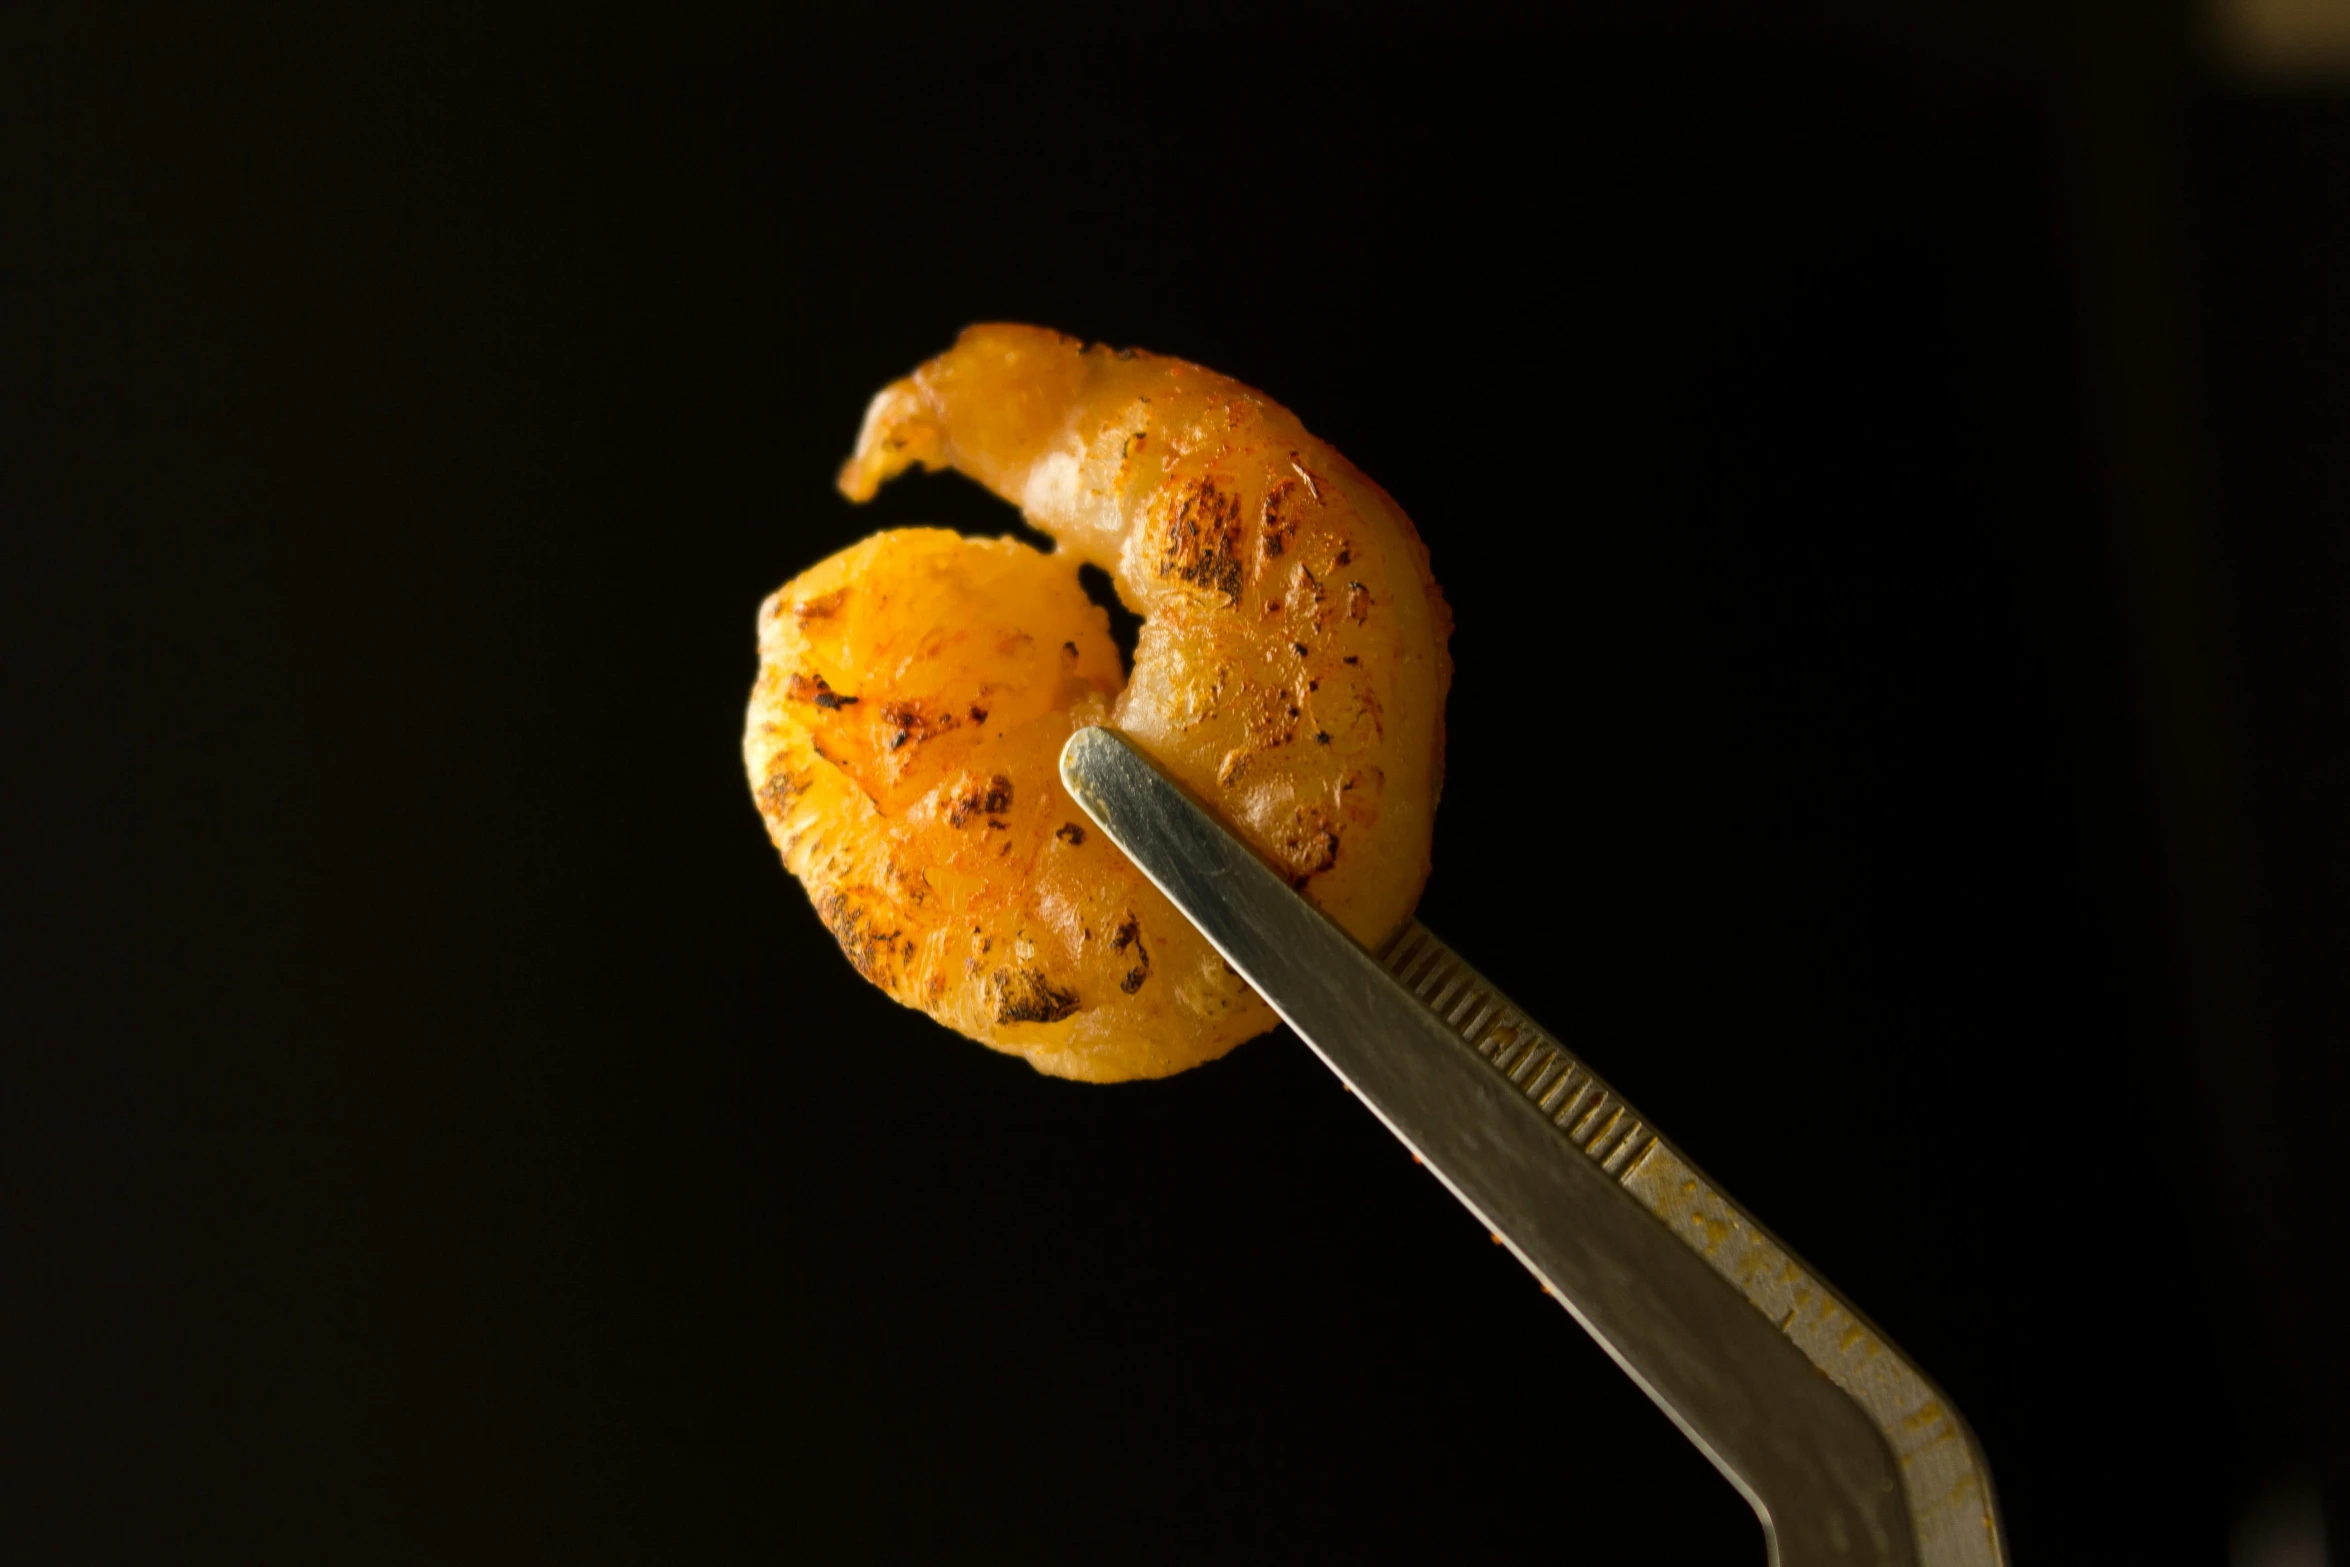 a close up of a piece of food on a fork, worm hole, detailed product image, spicy, fan favorite